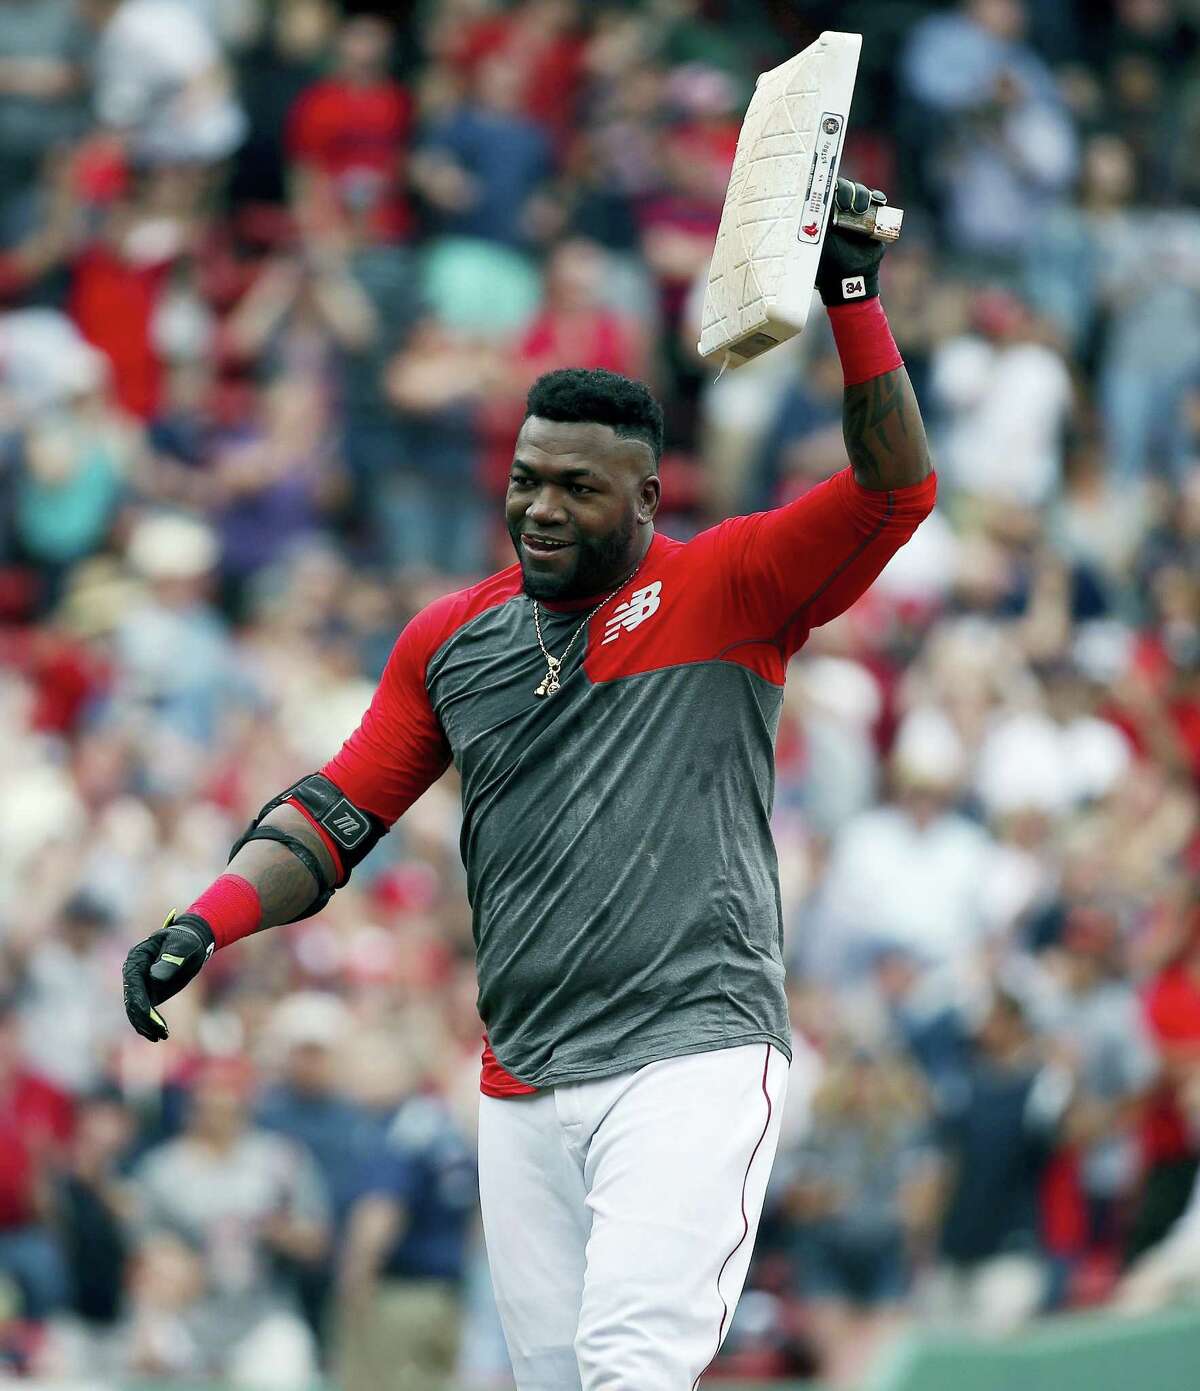 David Ortiz puts on a show, lifts Red Sox over Astros in 11th